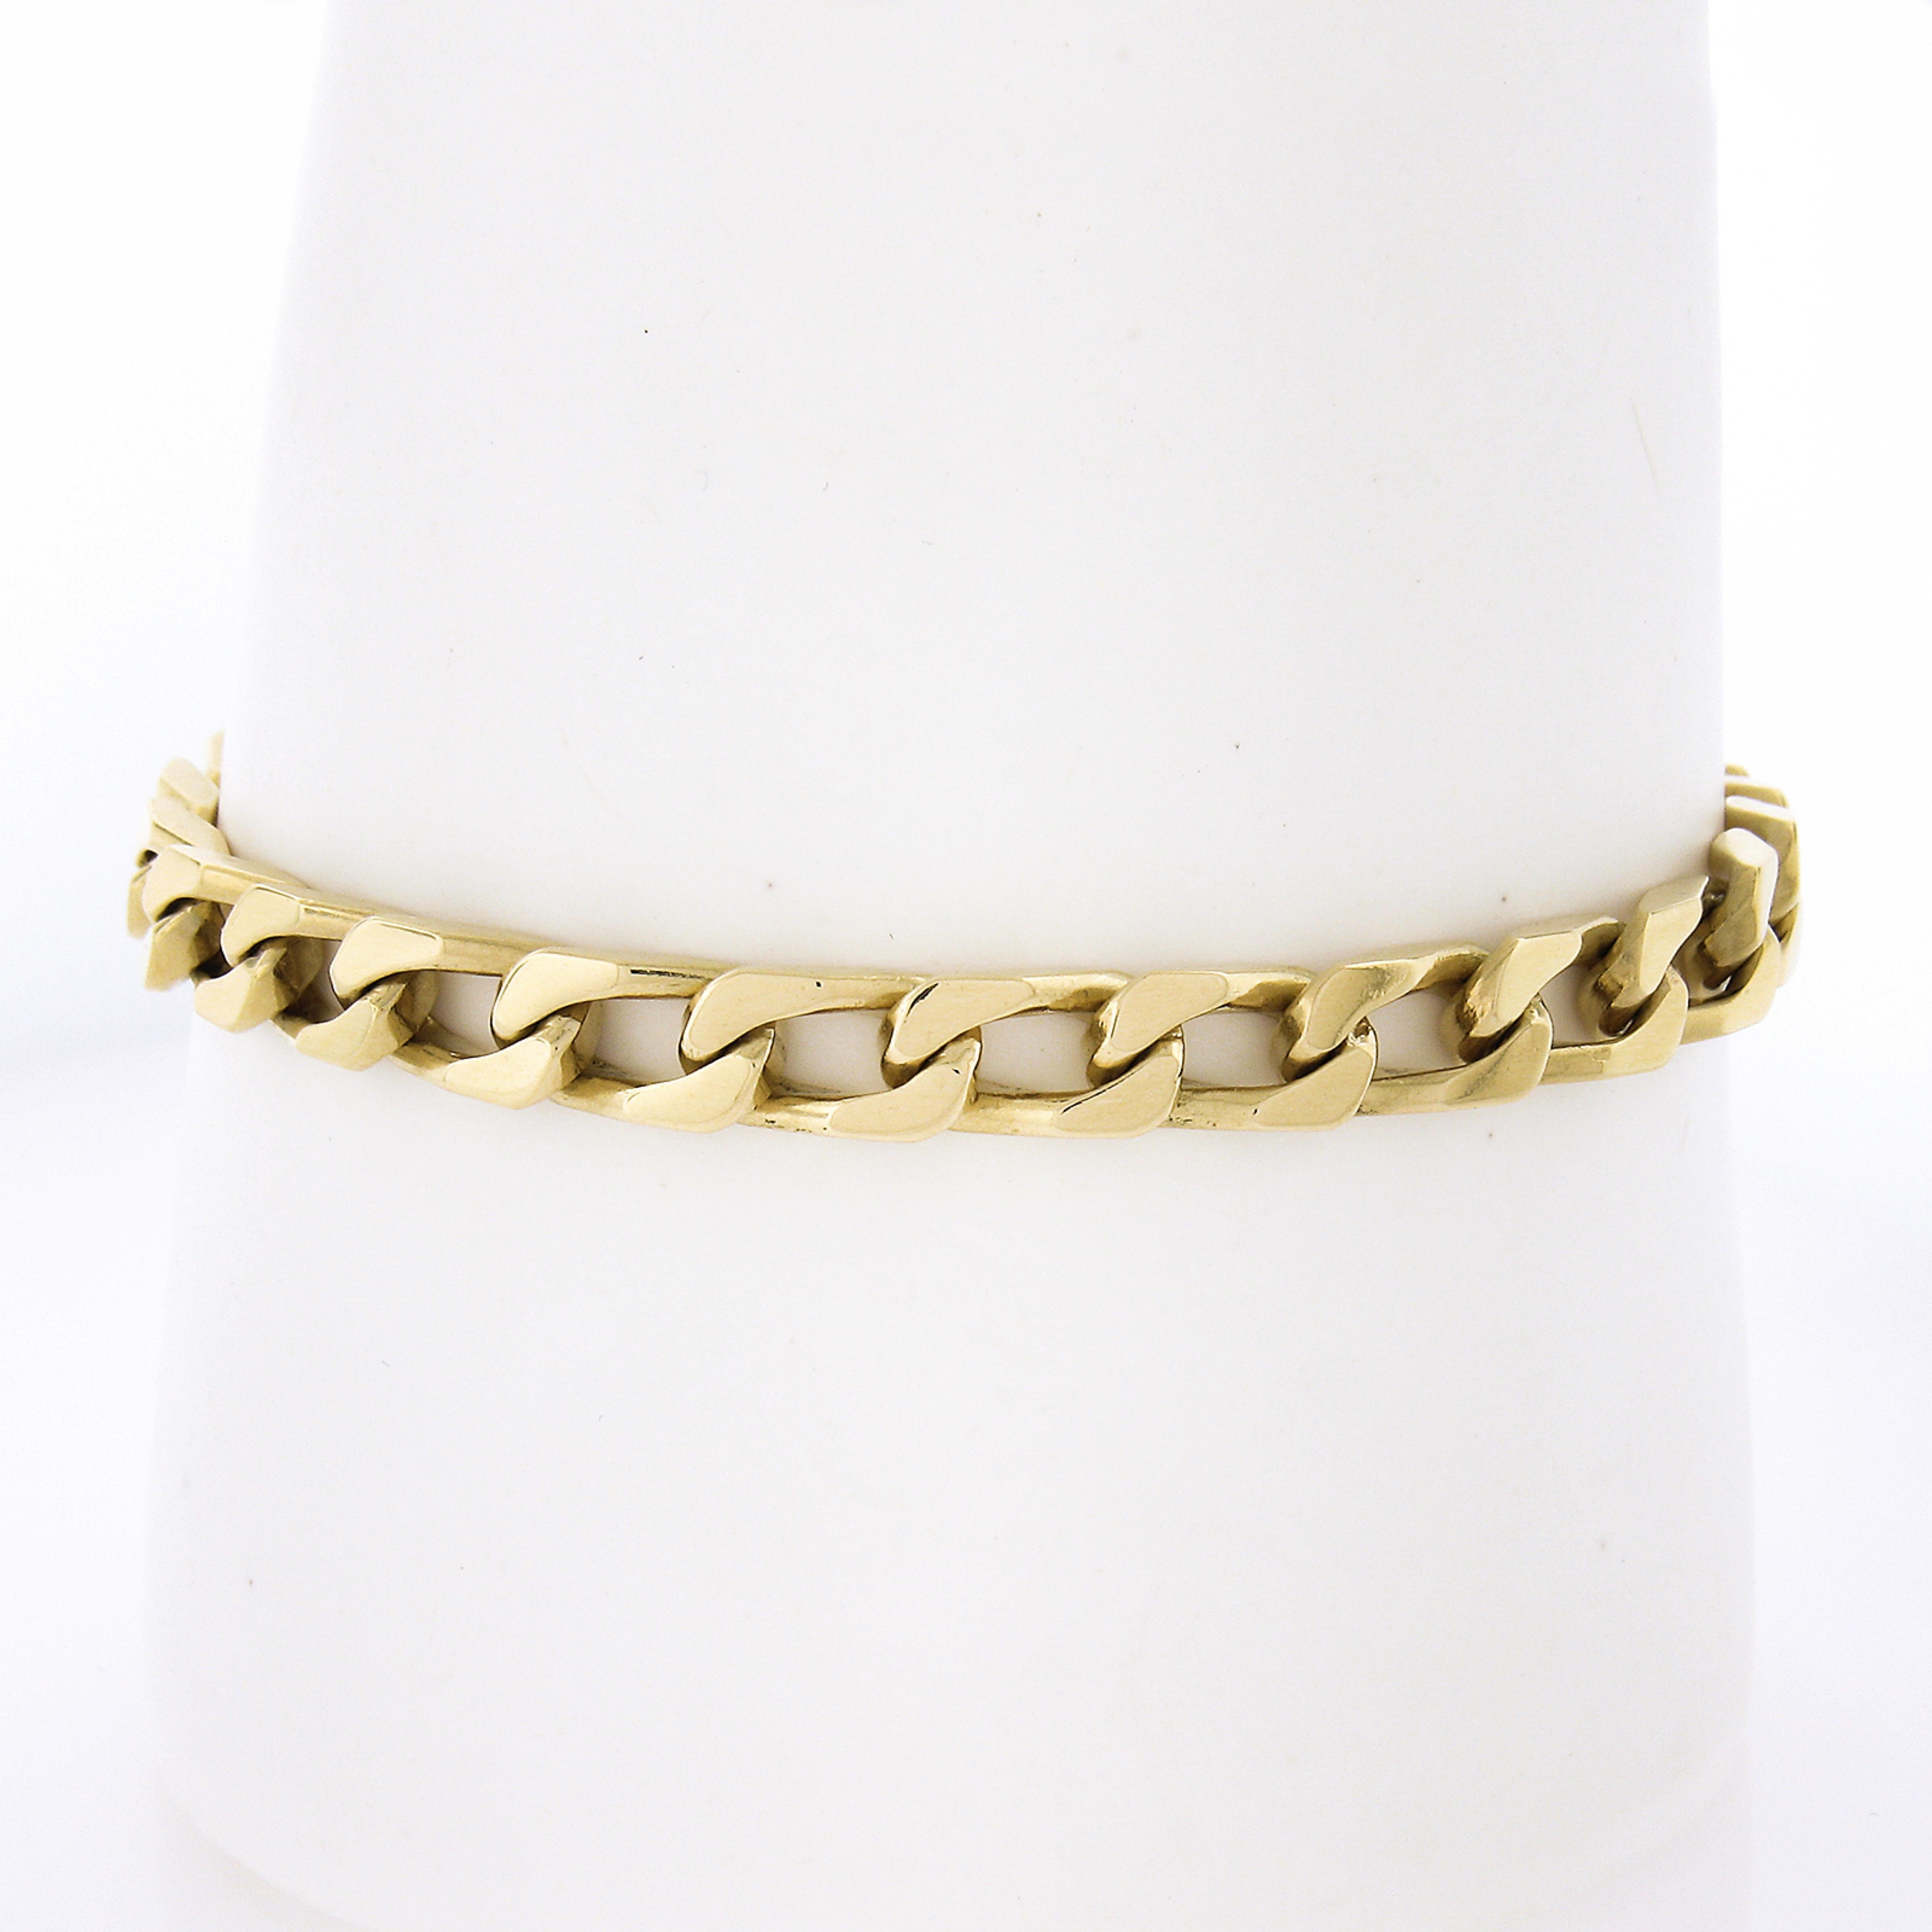 Material: Solid 18k Yellow Gold
Weight: 26.90 Grams
Chain Type: Cuban Curb Link
Chain Length: Measures 7.25 Inches Next to a Ruler. Will comfortably fit up to a 7 inch wrist
Chain Width: 5.7mm (approx.)
Chain Thickness: 2.7mm rise off the